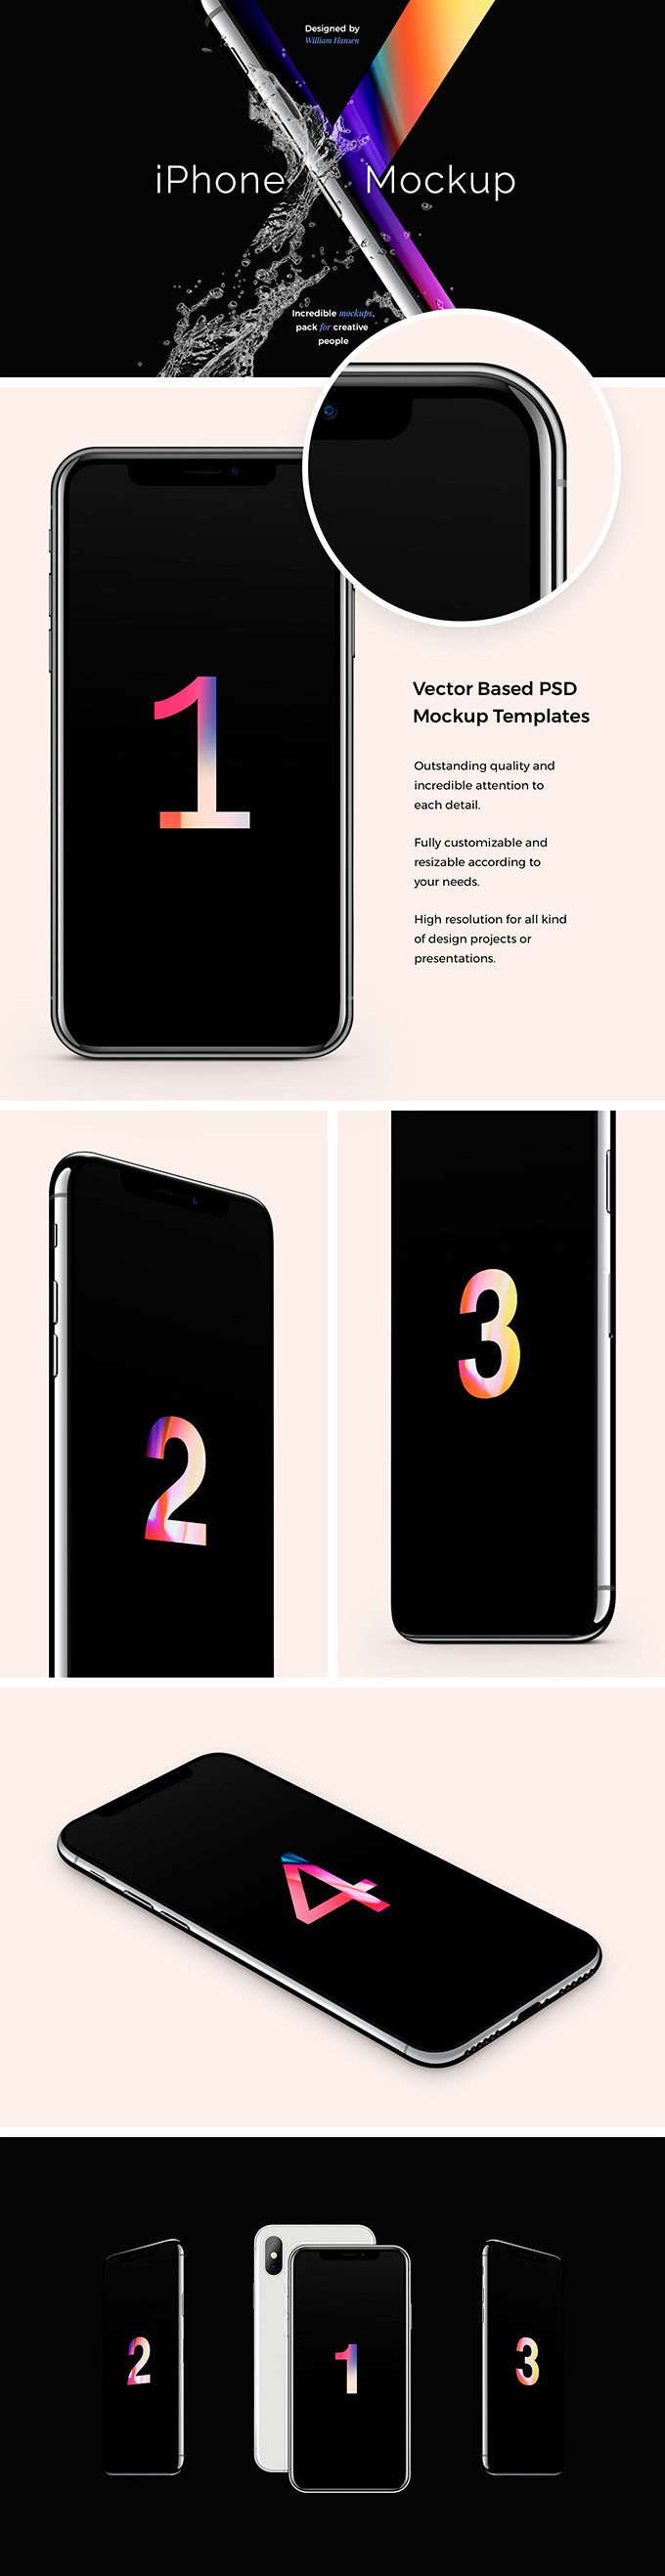 Free The Absolute Must-Have iPhone X Mockup Set